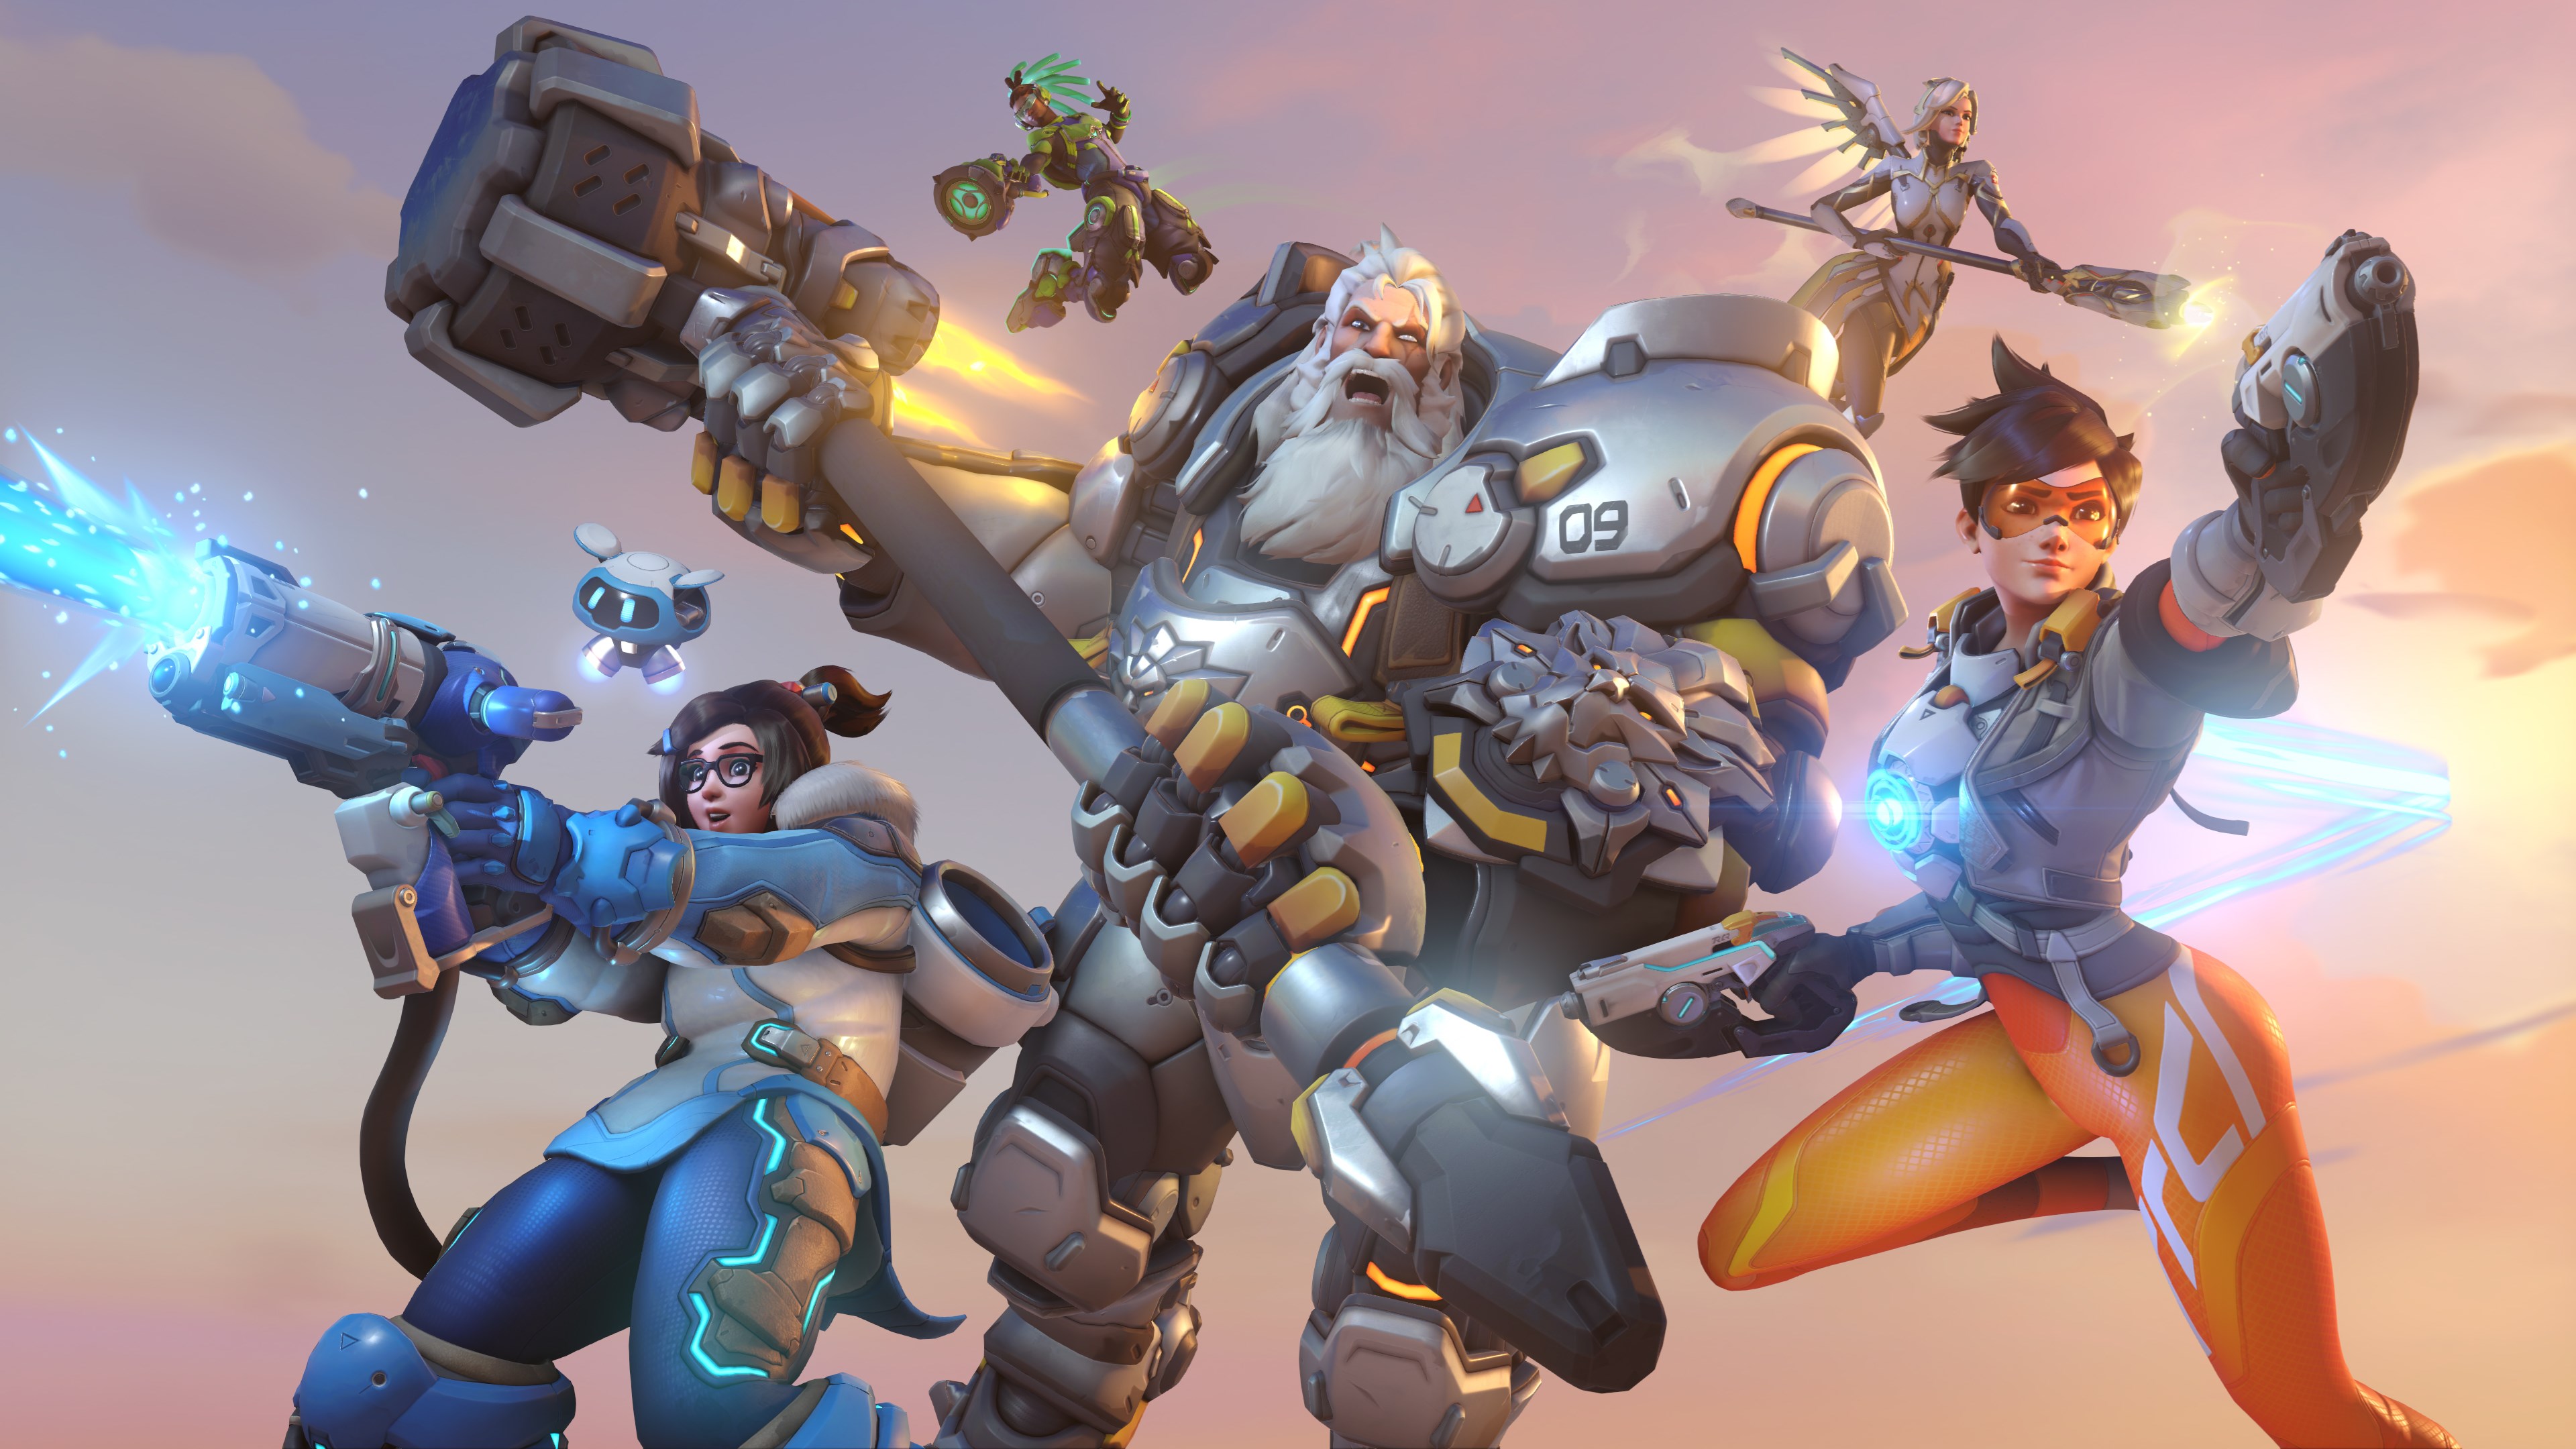 General 3840x2160 video games Overwatch Tracer (Overwatch) Reinhardt (Overwatch) Mei (Overwatch) Mercy (Overwatch) Lúcio (Overwatch) Blizzard Entertainment PC gaming